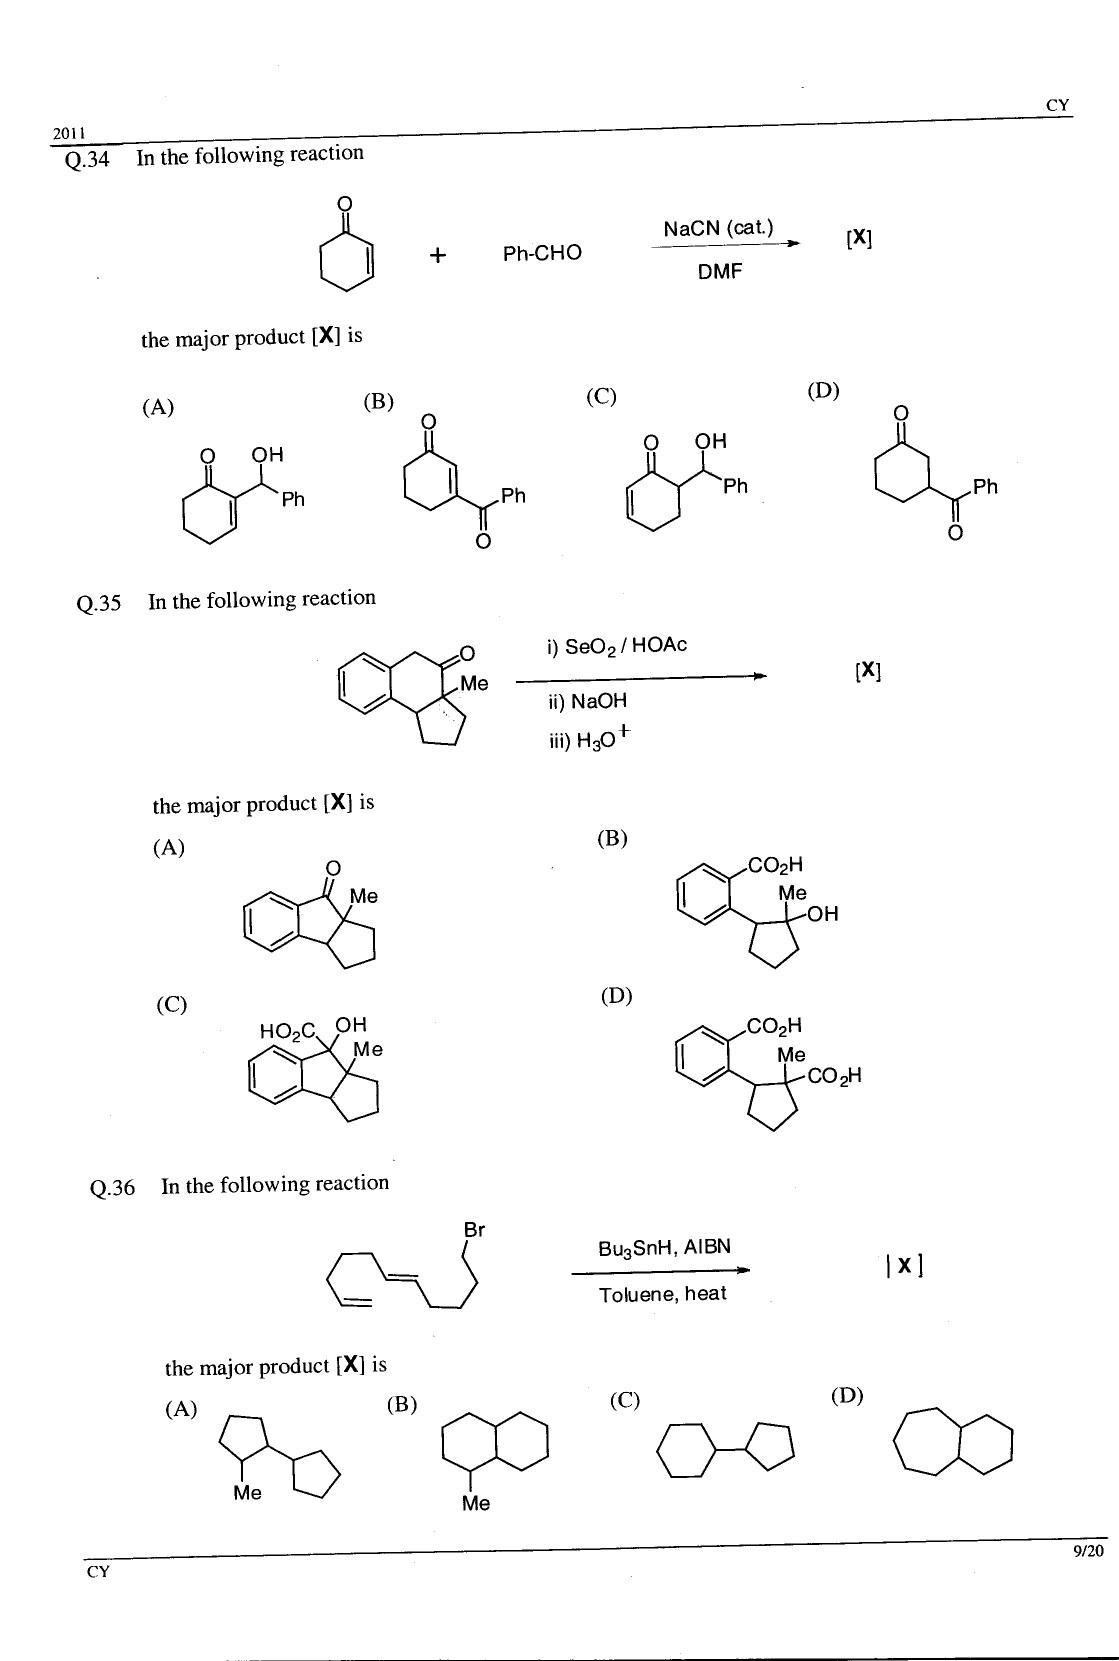 GATE Exam Question Paper 2011 Chemistry 9